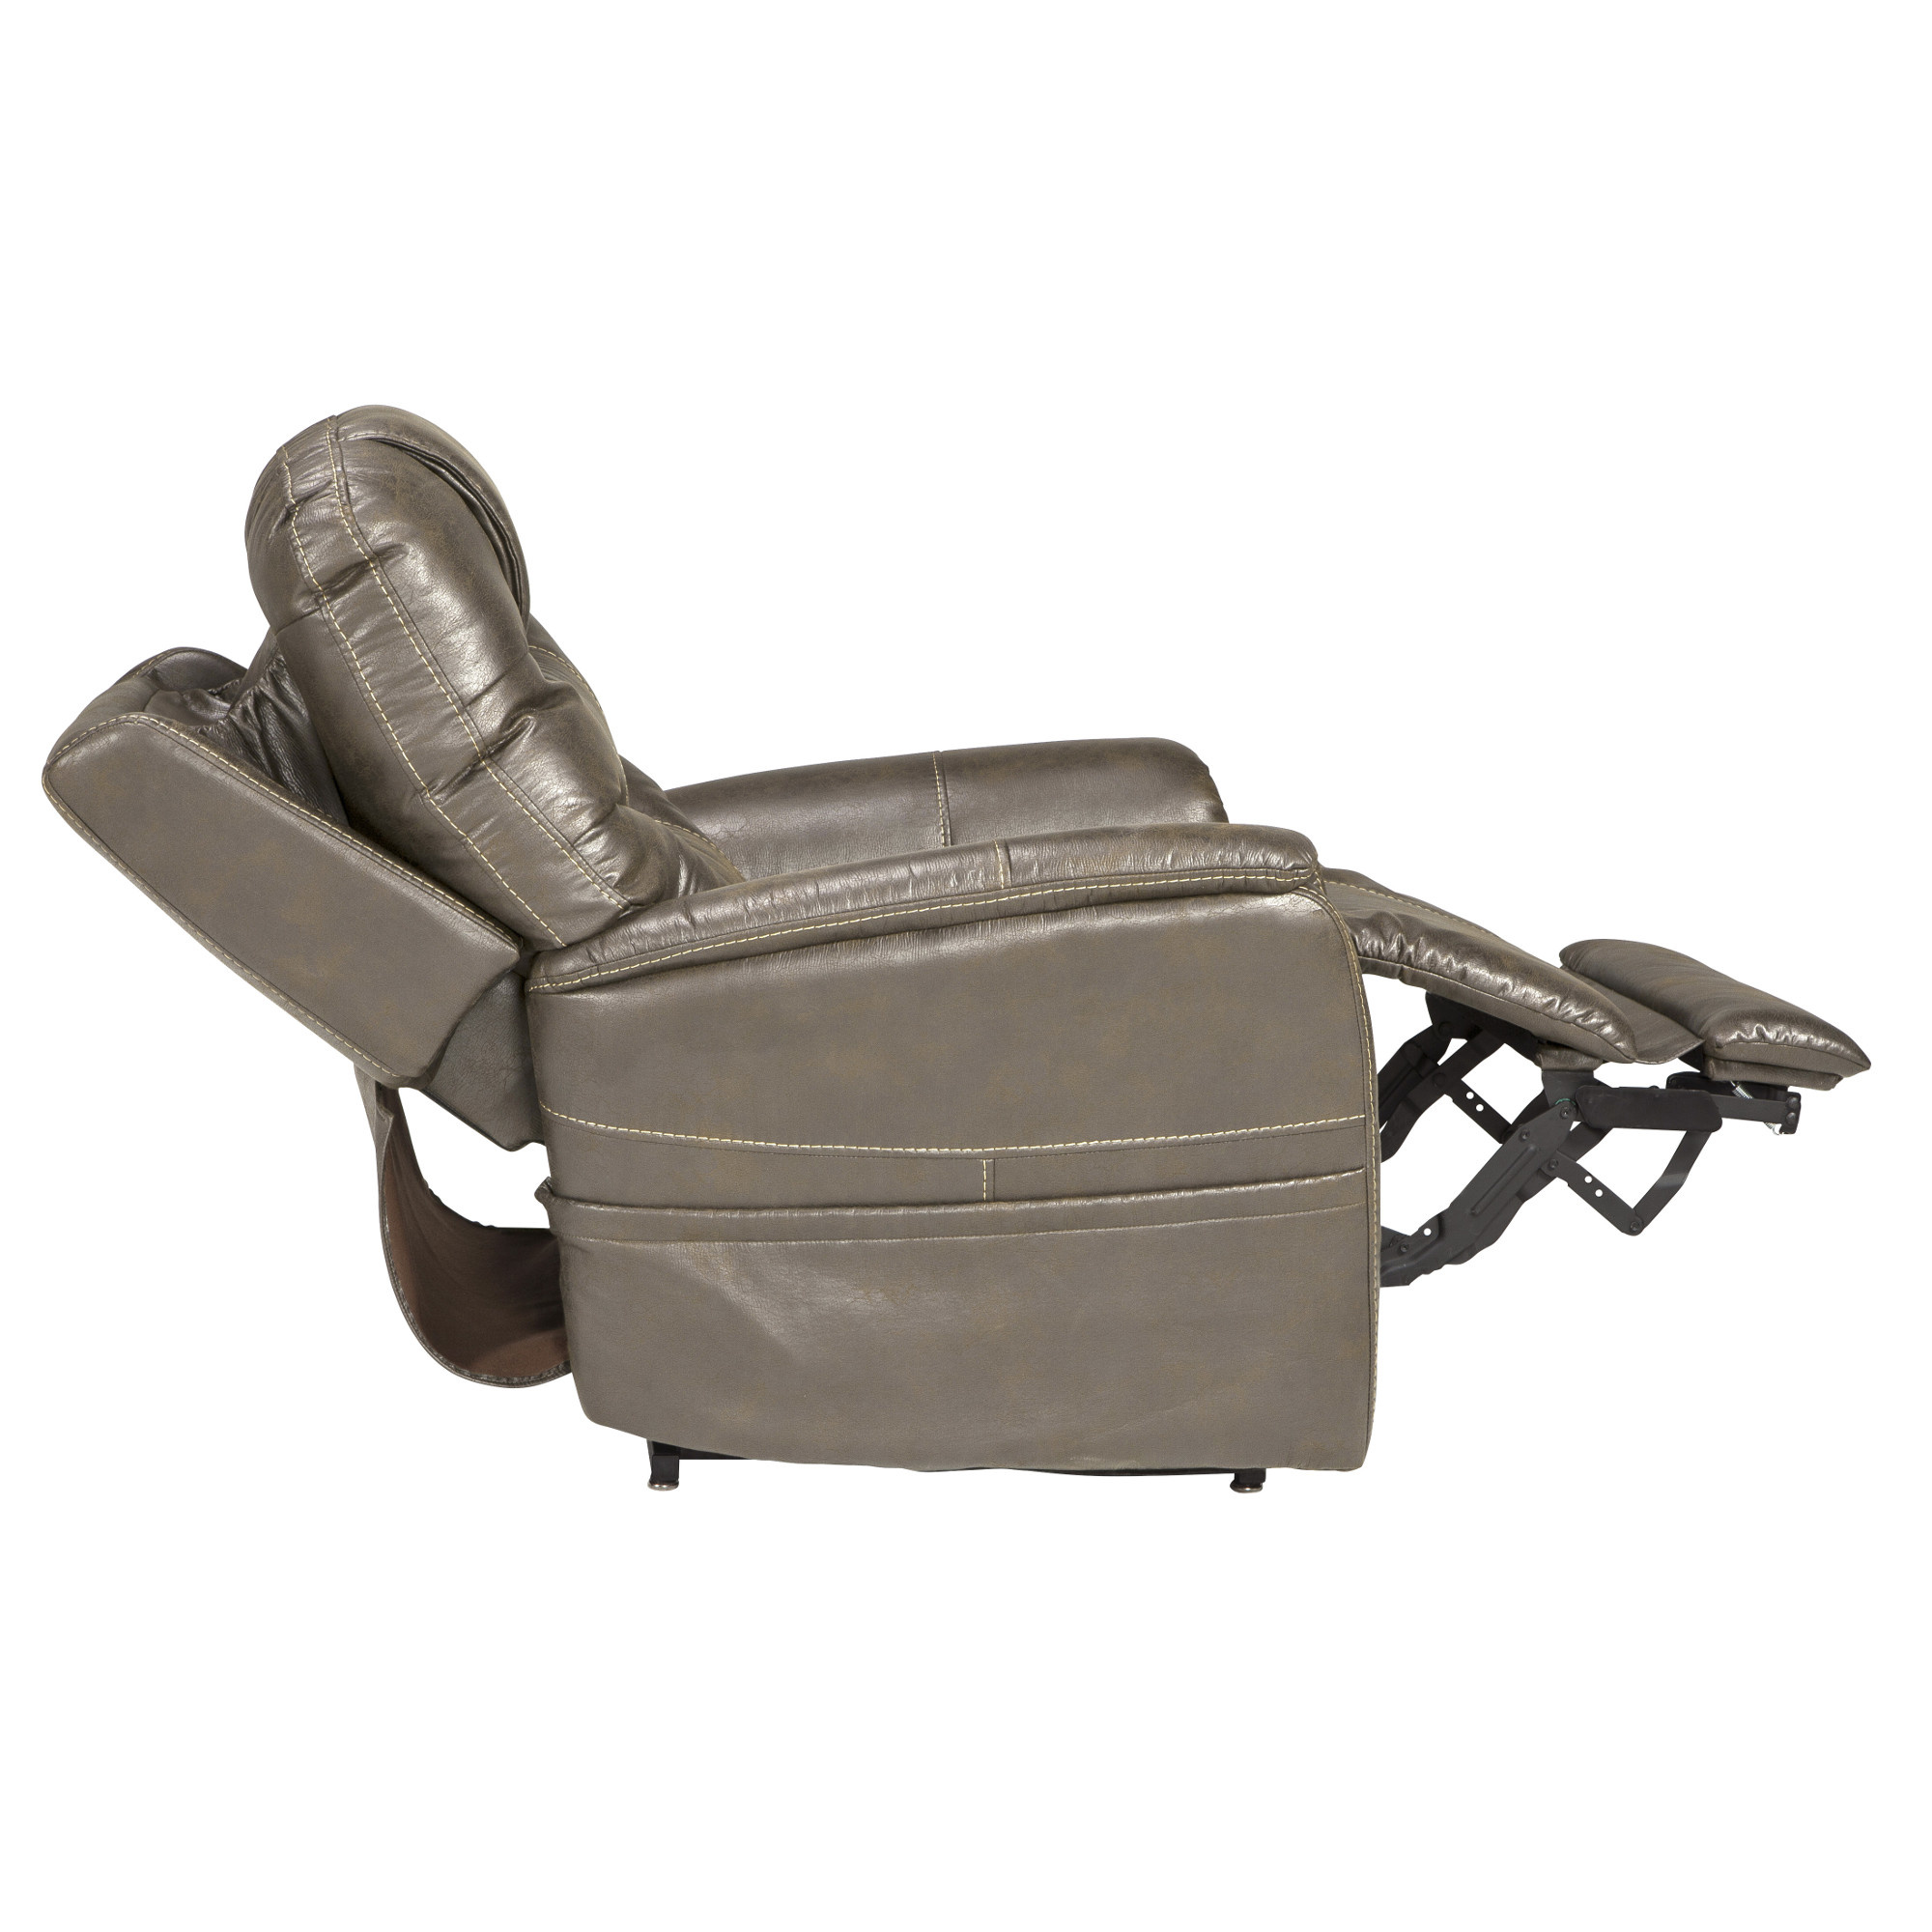 Pride VivaLift Elegance 2 Lift Chair by Pride Mobility - Free Shipping,  Tax-Free Sales & More